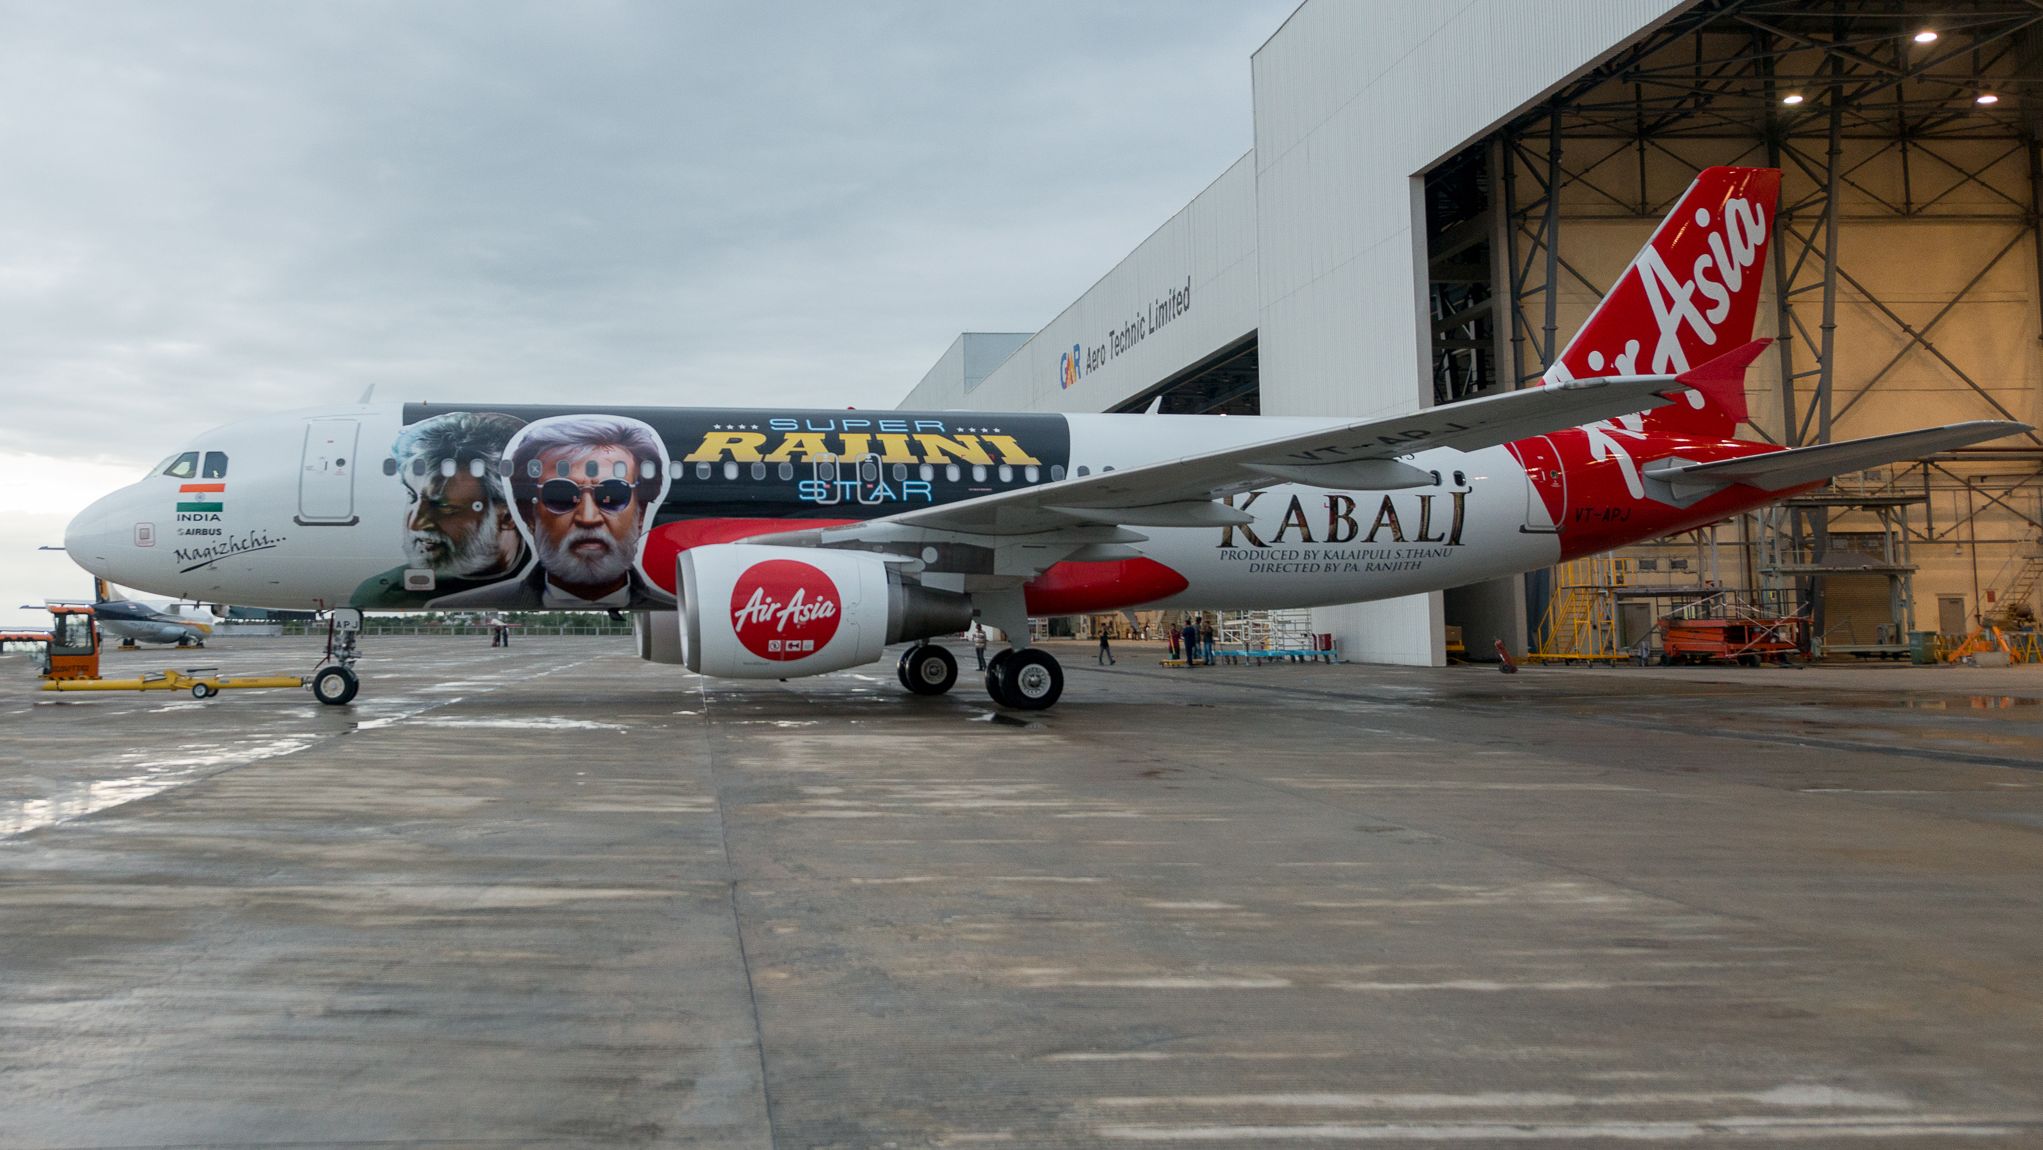 Budget airlines AirAsia has created a special flight from Bangalore to Chennai for the film's screening.